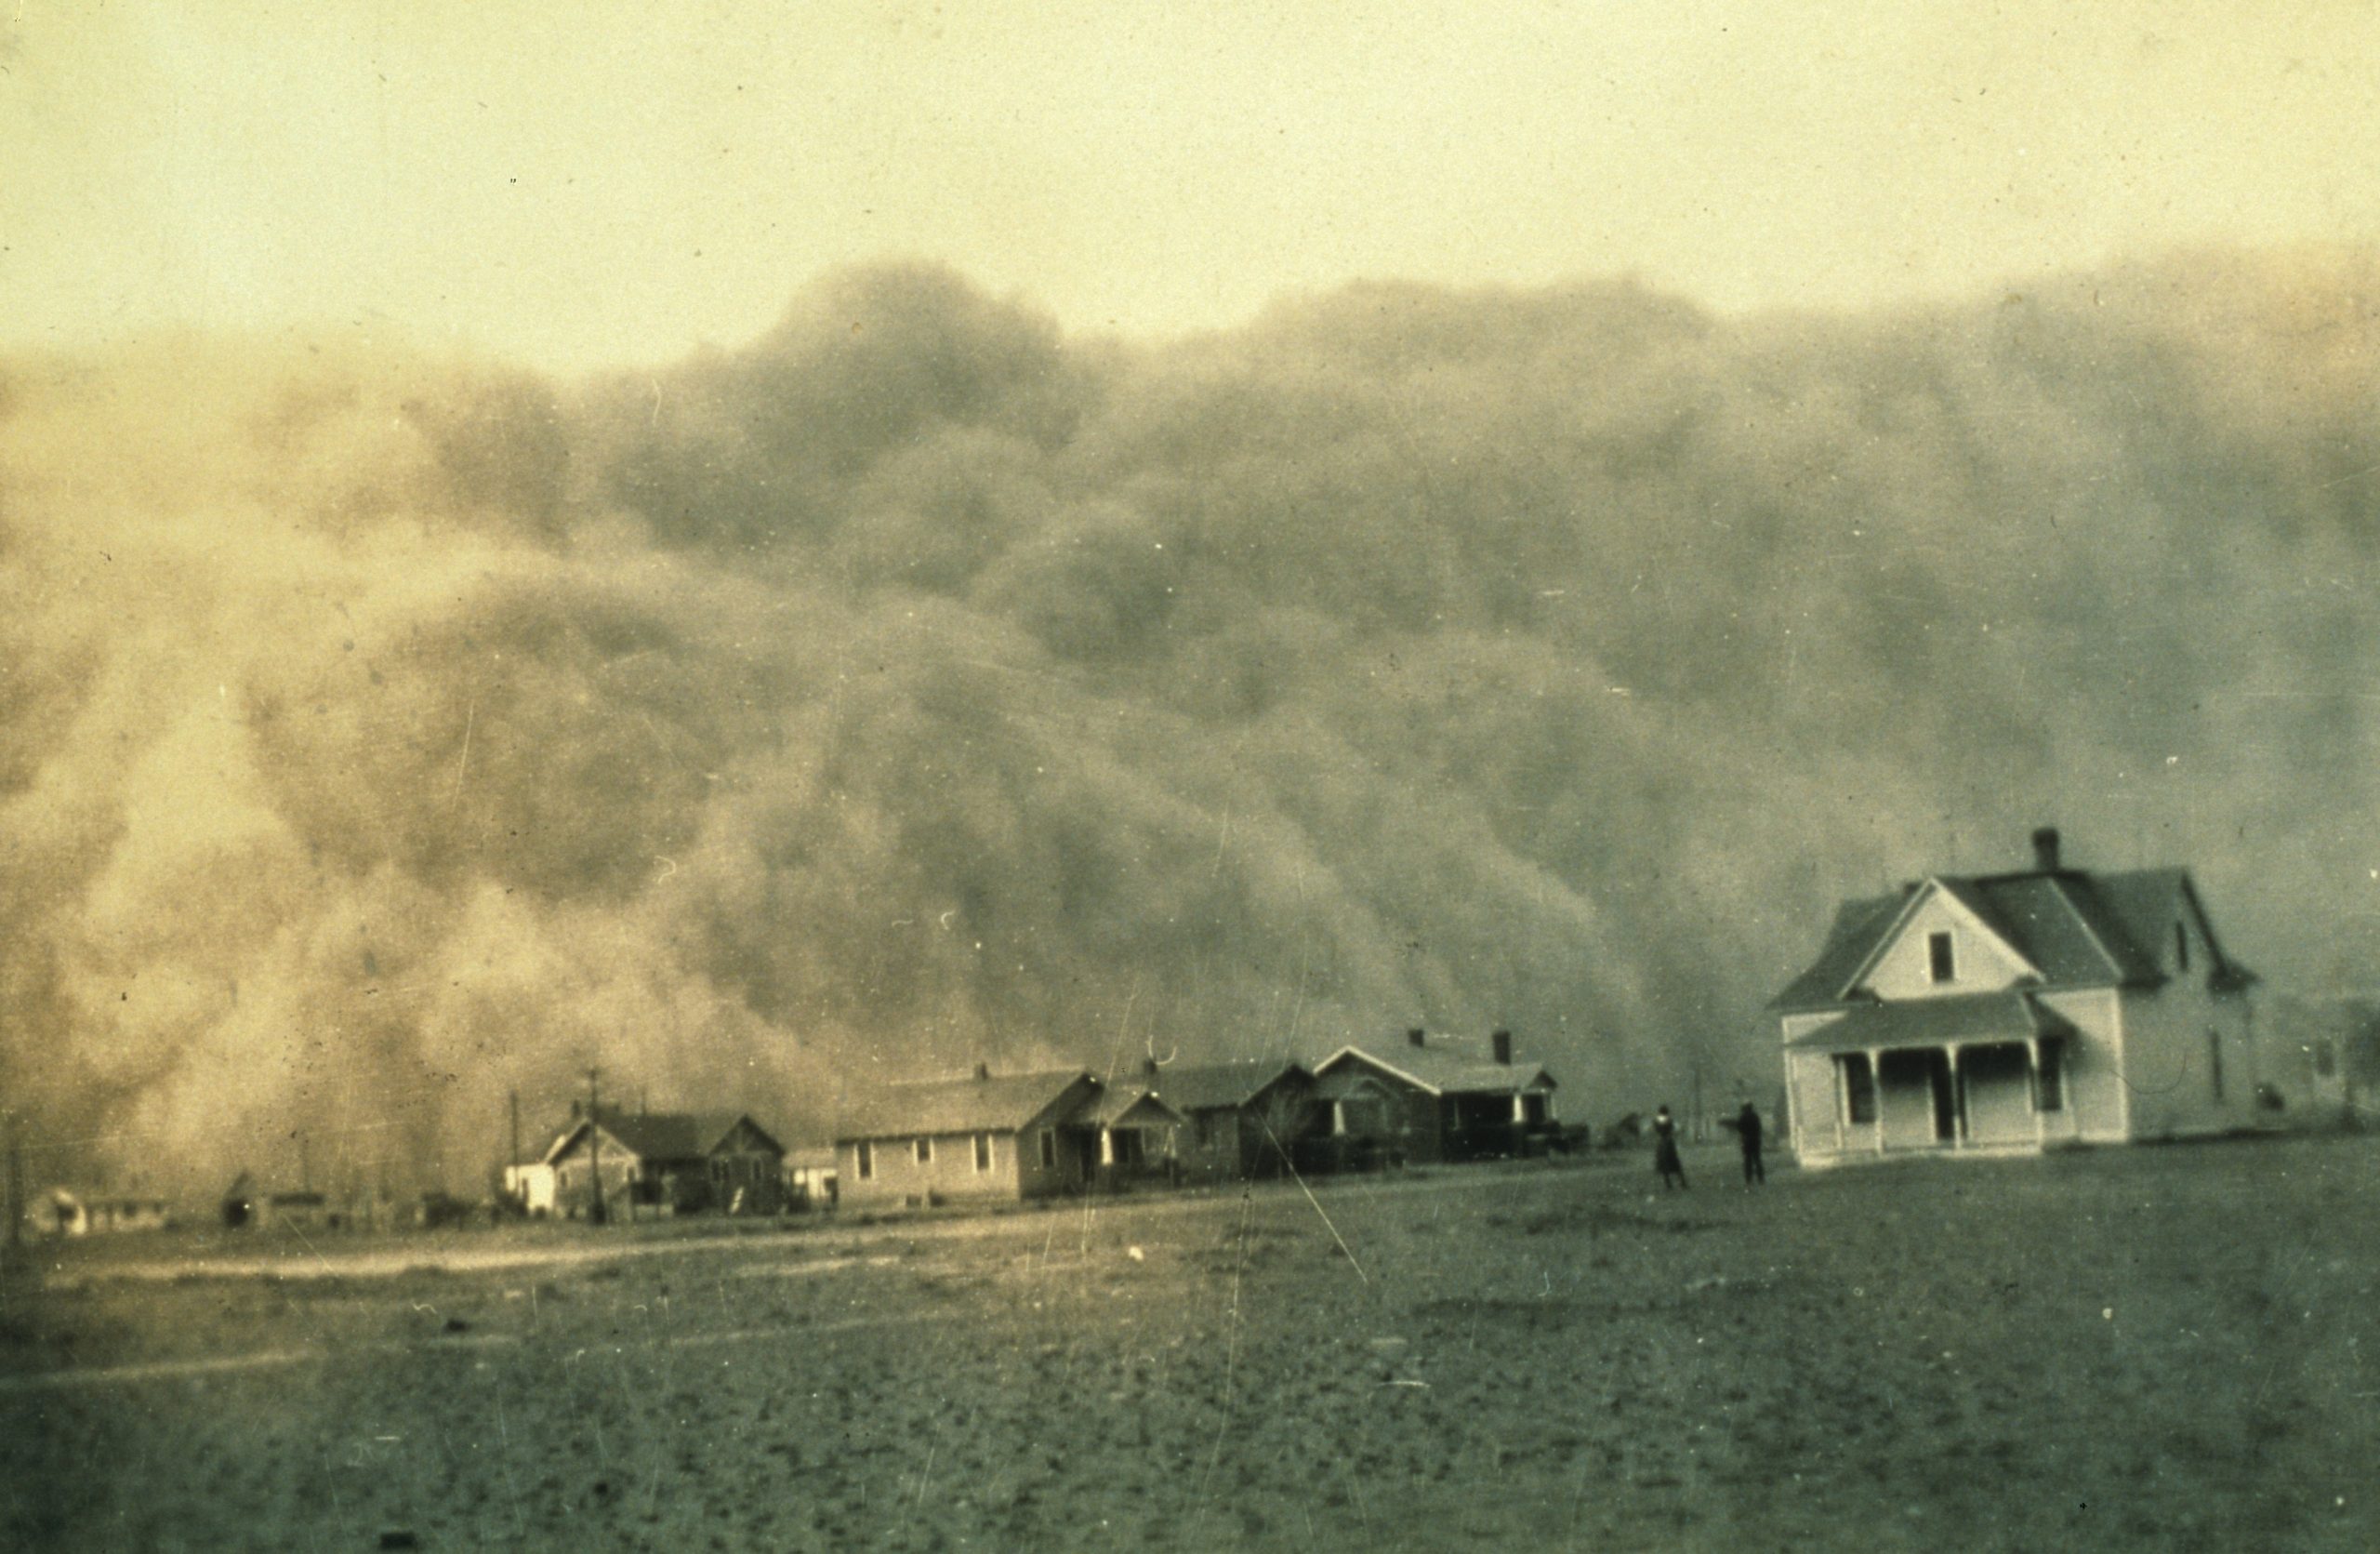 The black and white photo shows a giant wall of dust.